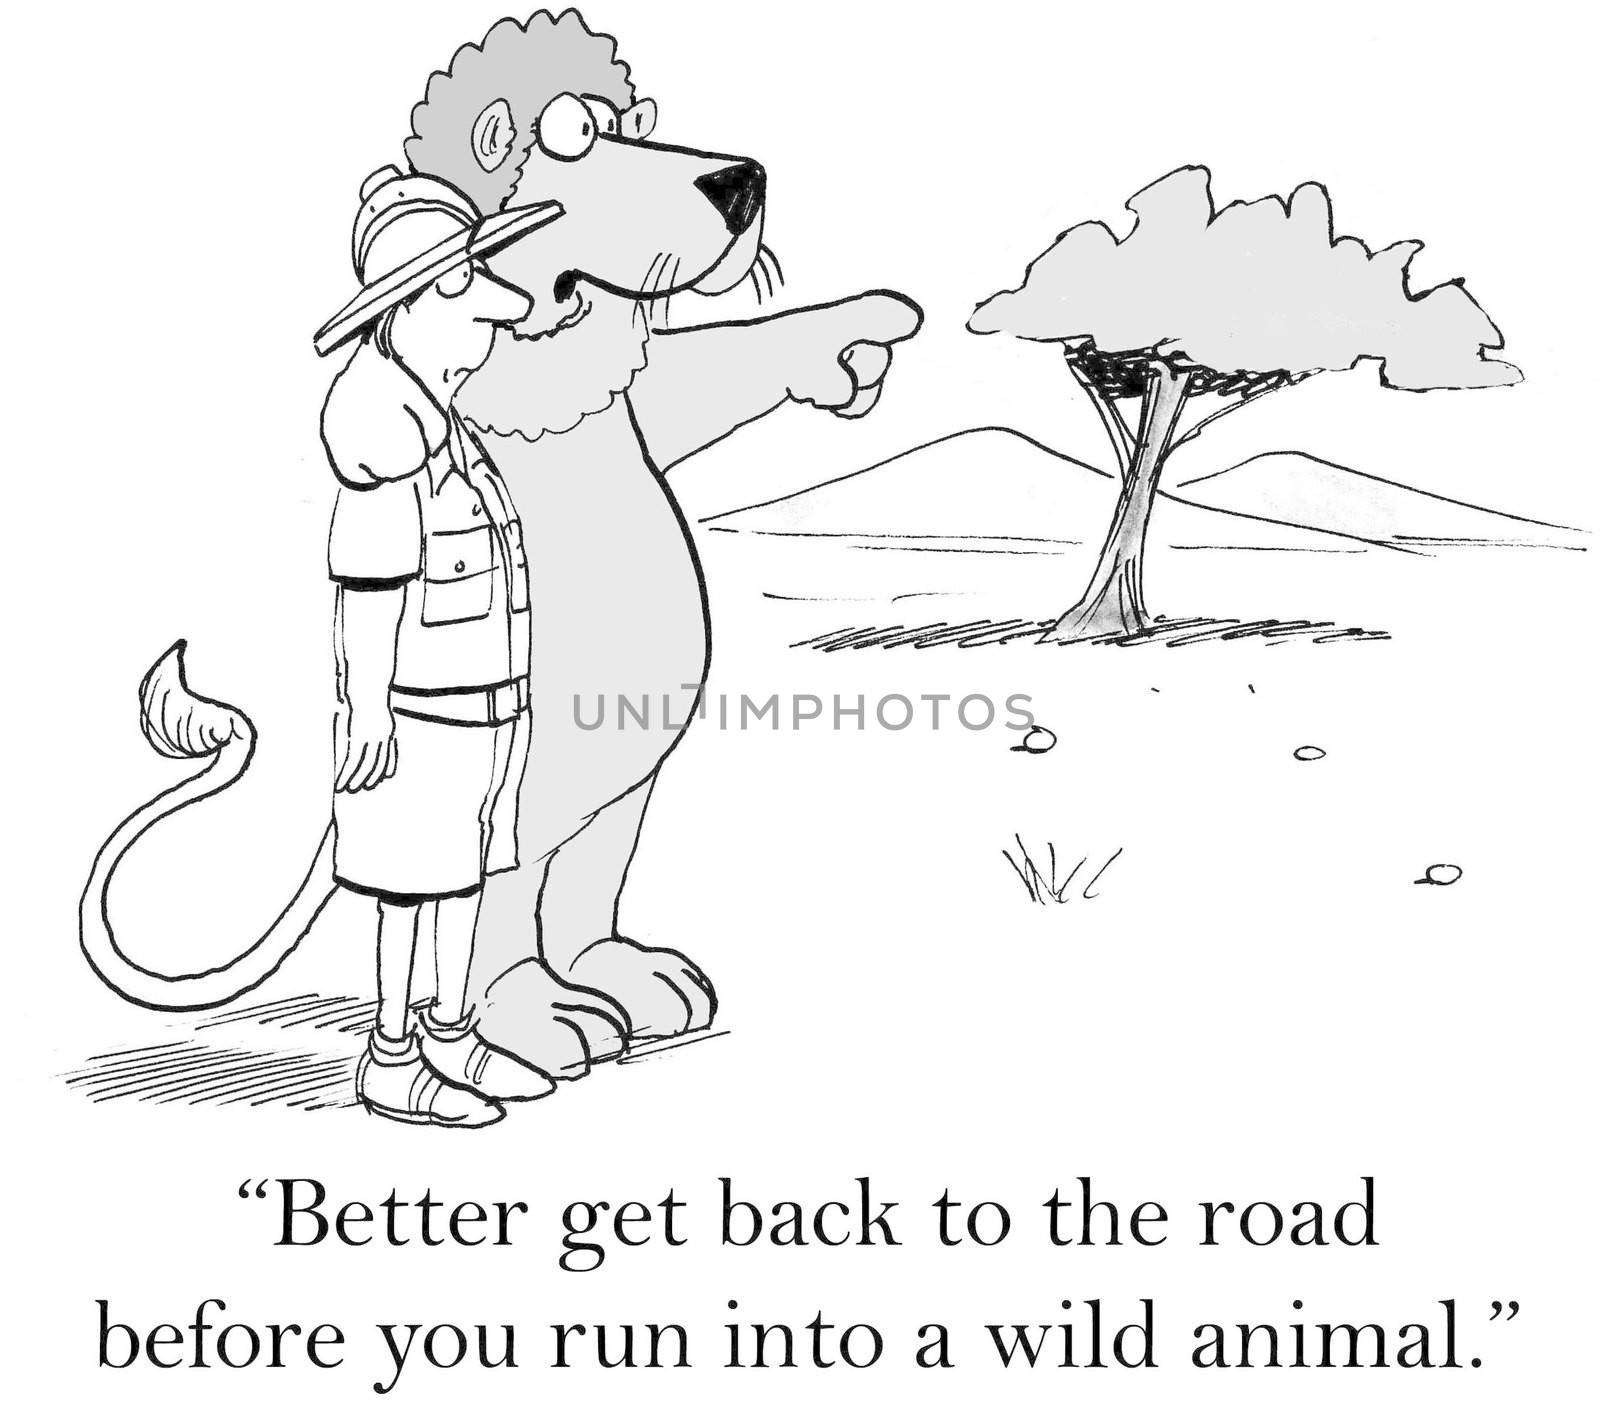 "Better get back to the road before you run into a wild animal."